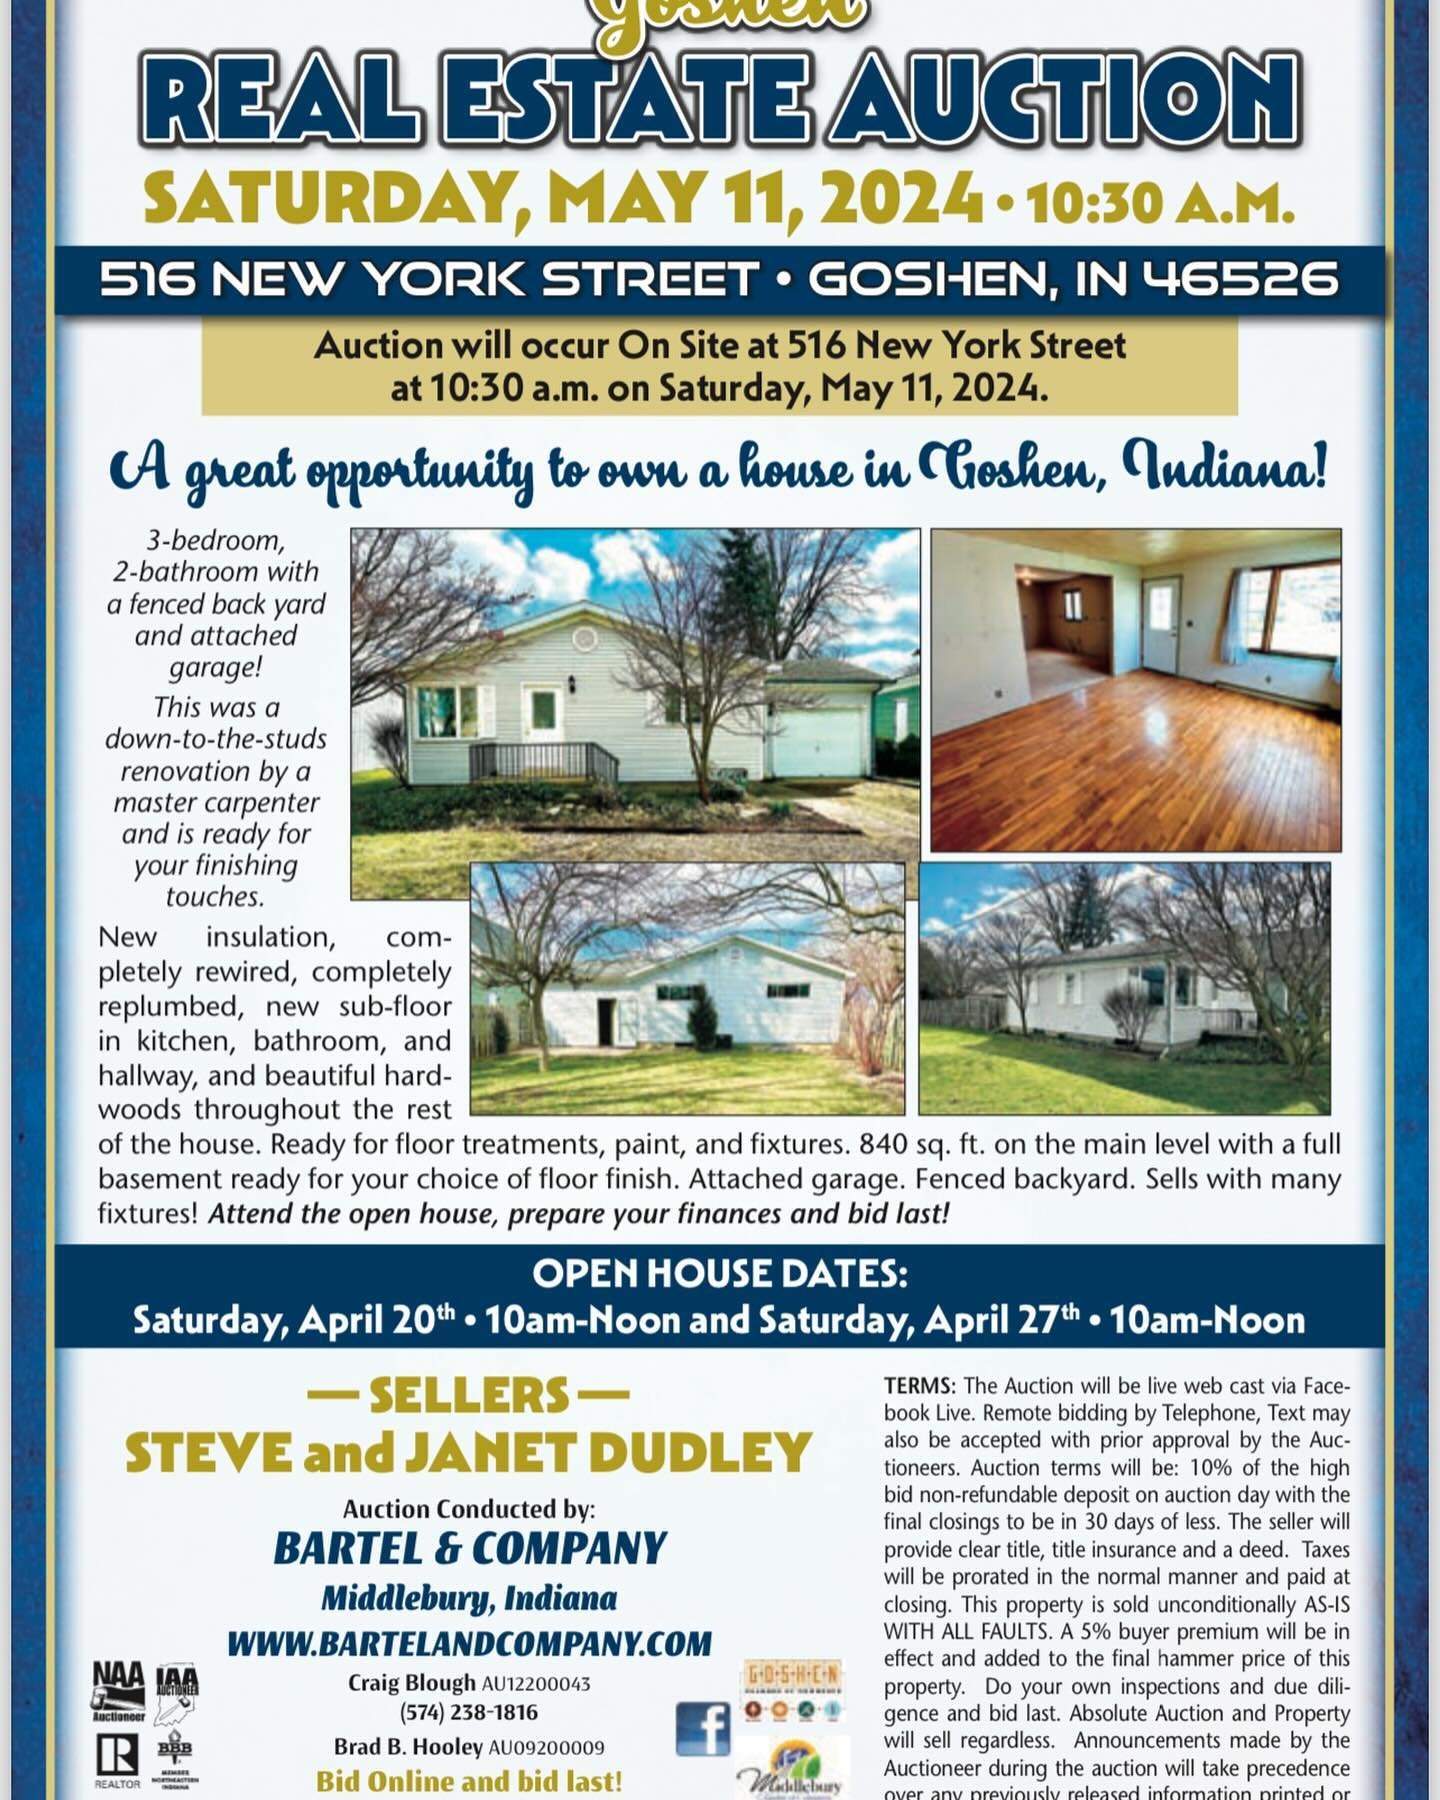 Join us Saturday, May 11, 2024 at 10:30 am for the Public Auction at 516 New York Street, Goshen, IN Please call Craig Blough, Broker, Auctioneer, 574-238-1816 with any questions.  #goshenhomesforsale #elkhartcountyhomesforsale